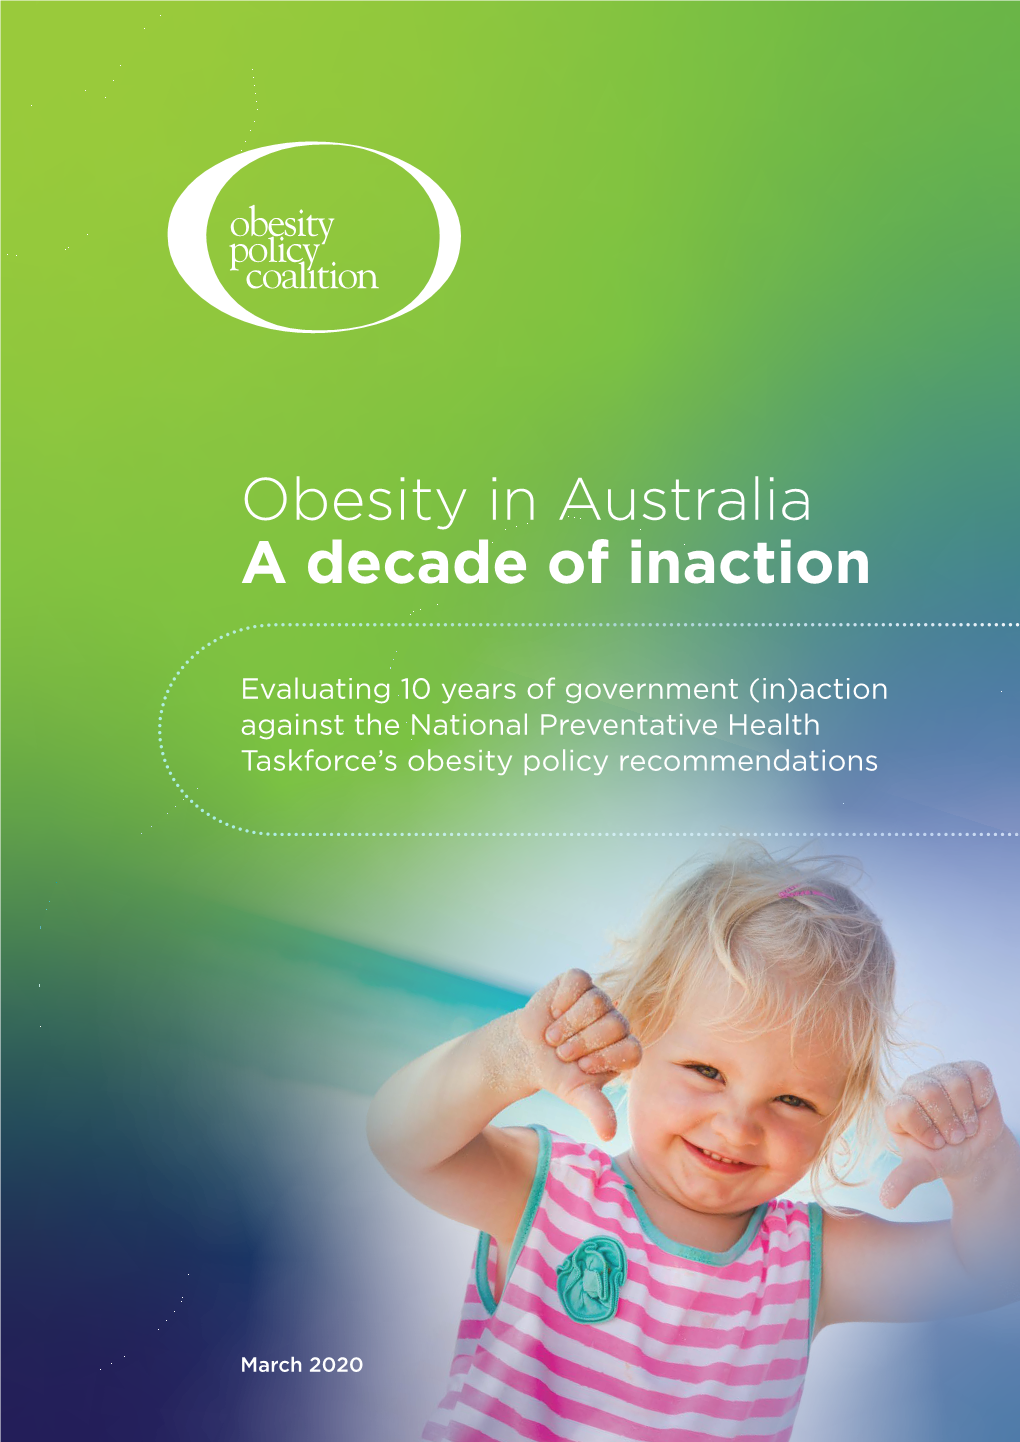 Obesity in Australia a Decade of Inaction